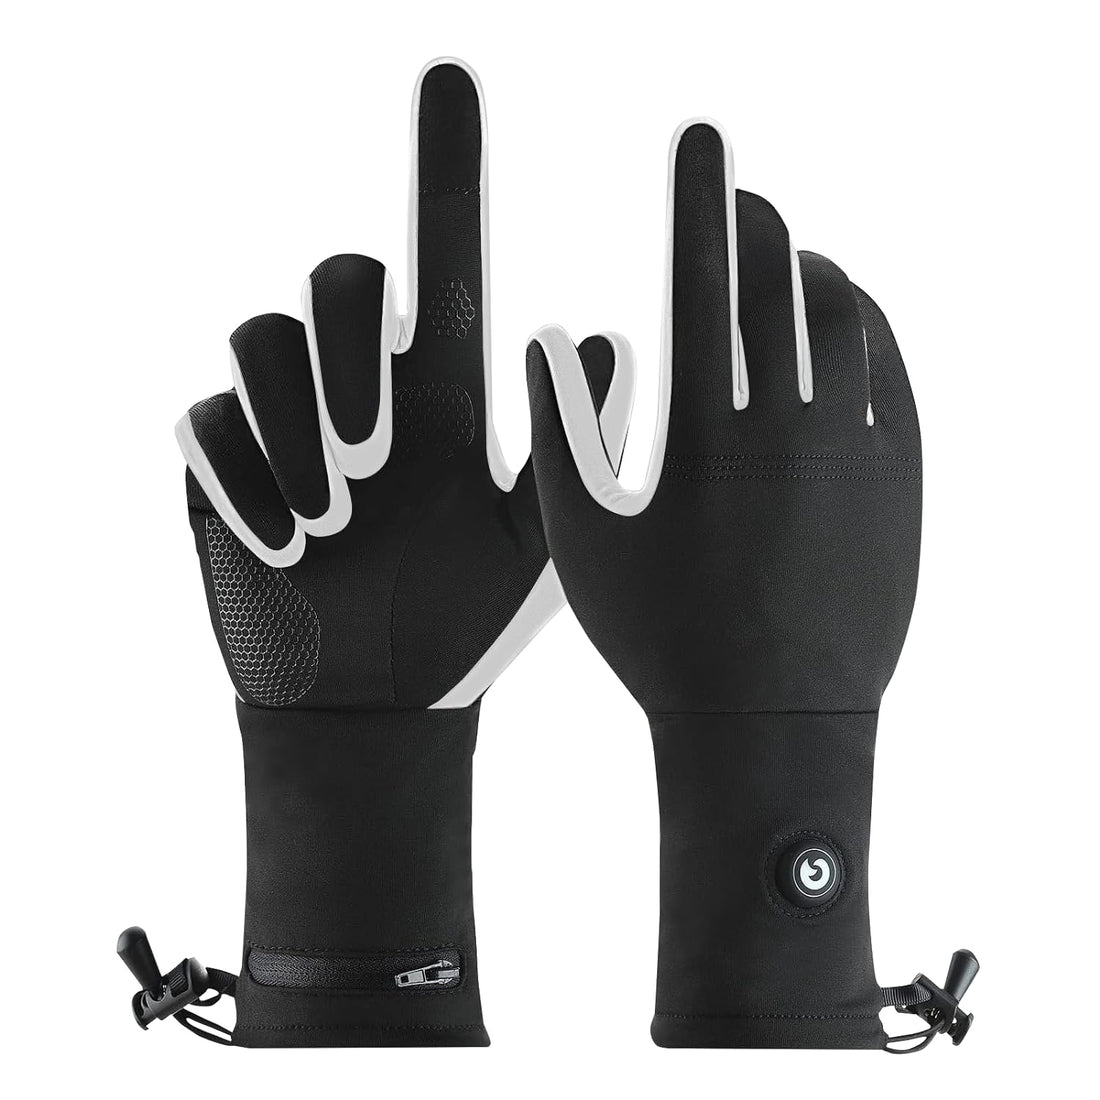 Heated Glove Liners, Heated Arthritis Gloves Raynauds Gloves, Winter Electric Heated Gloves for Men Women